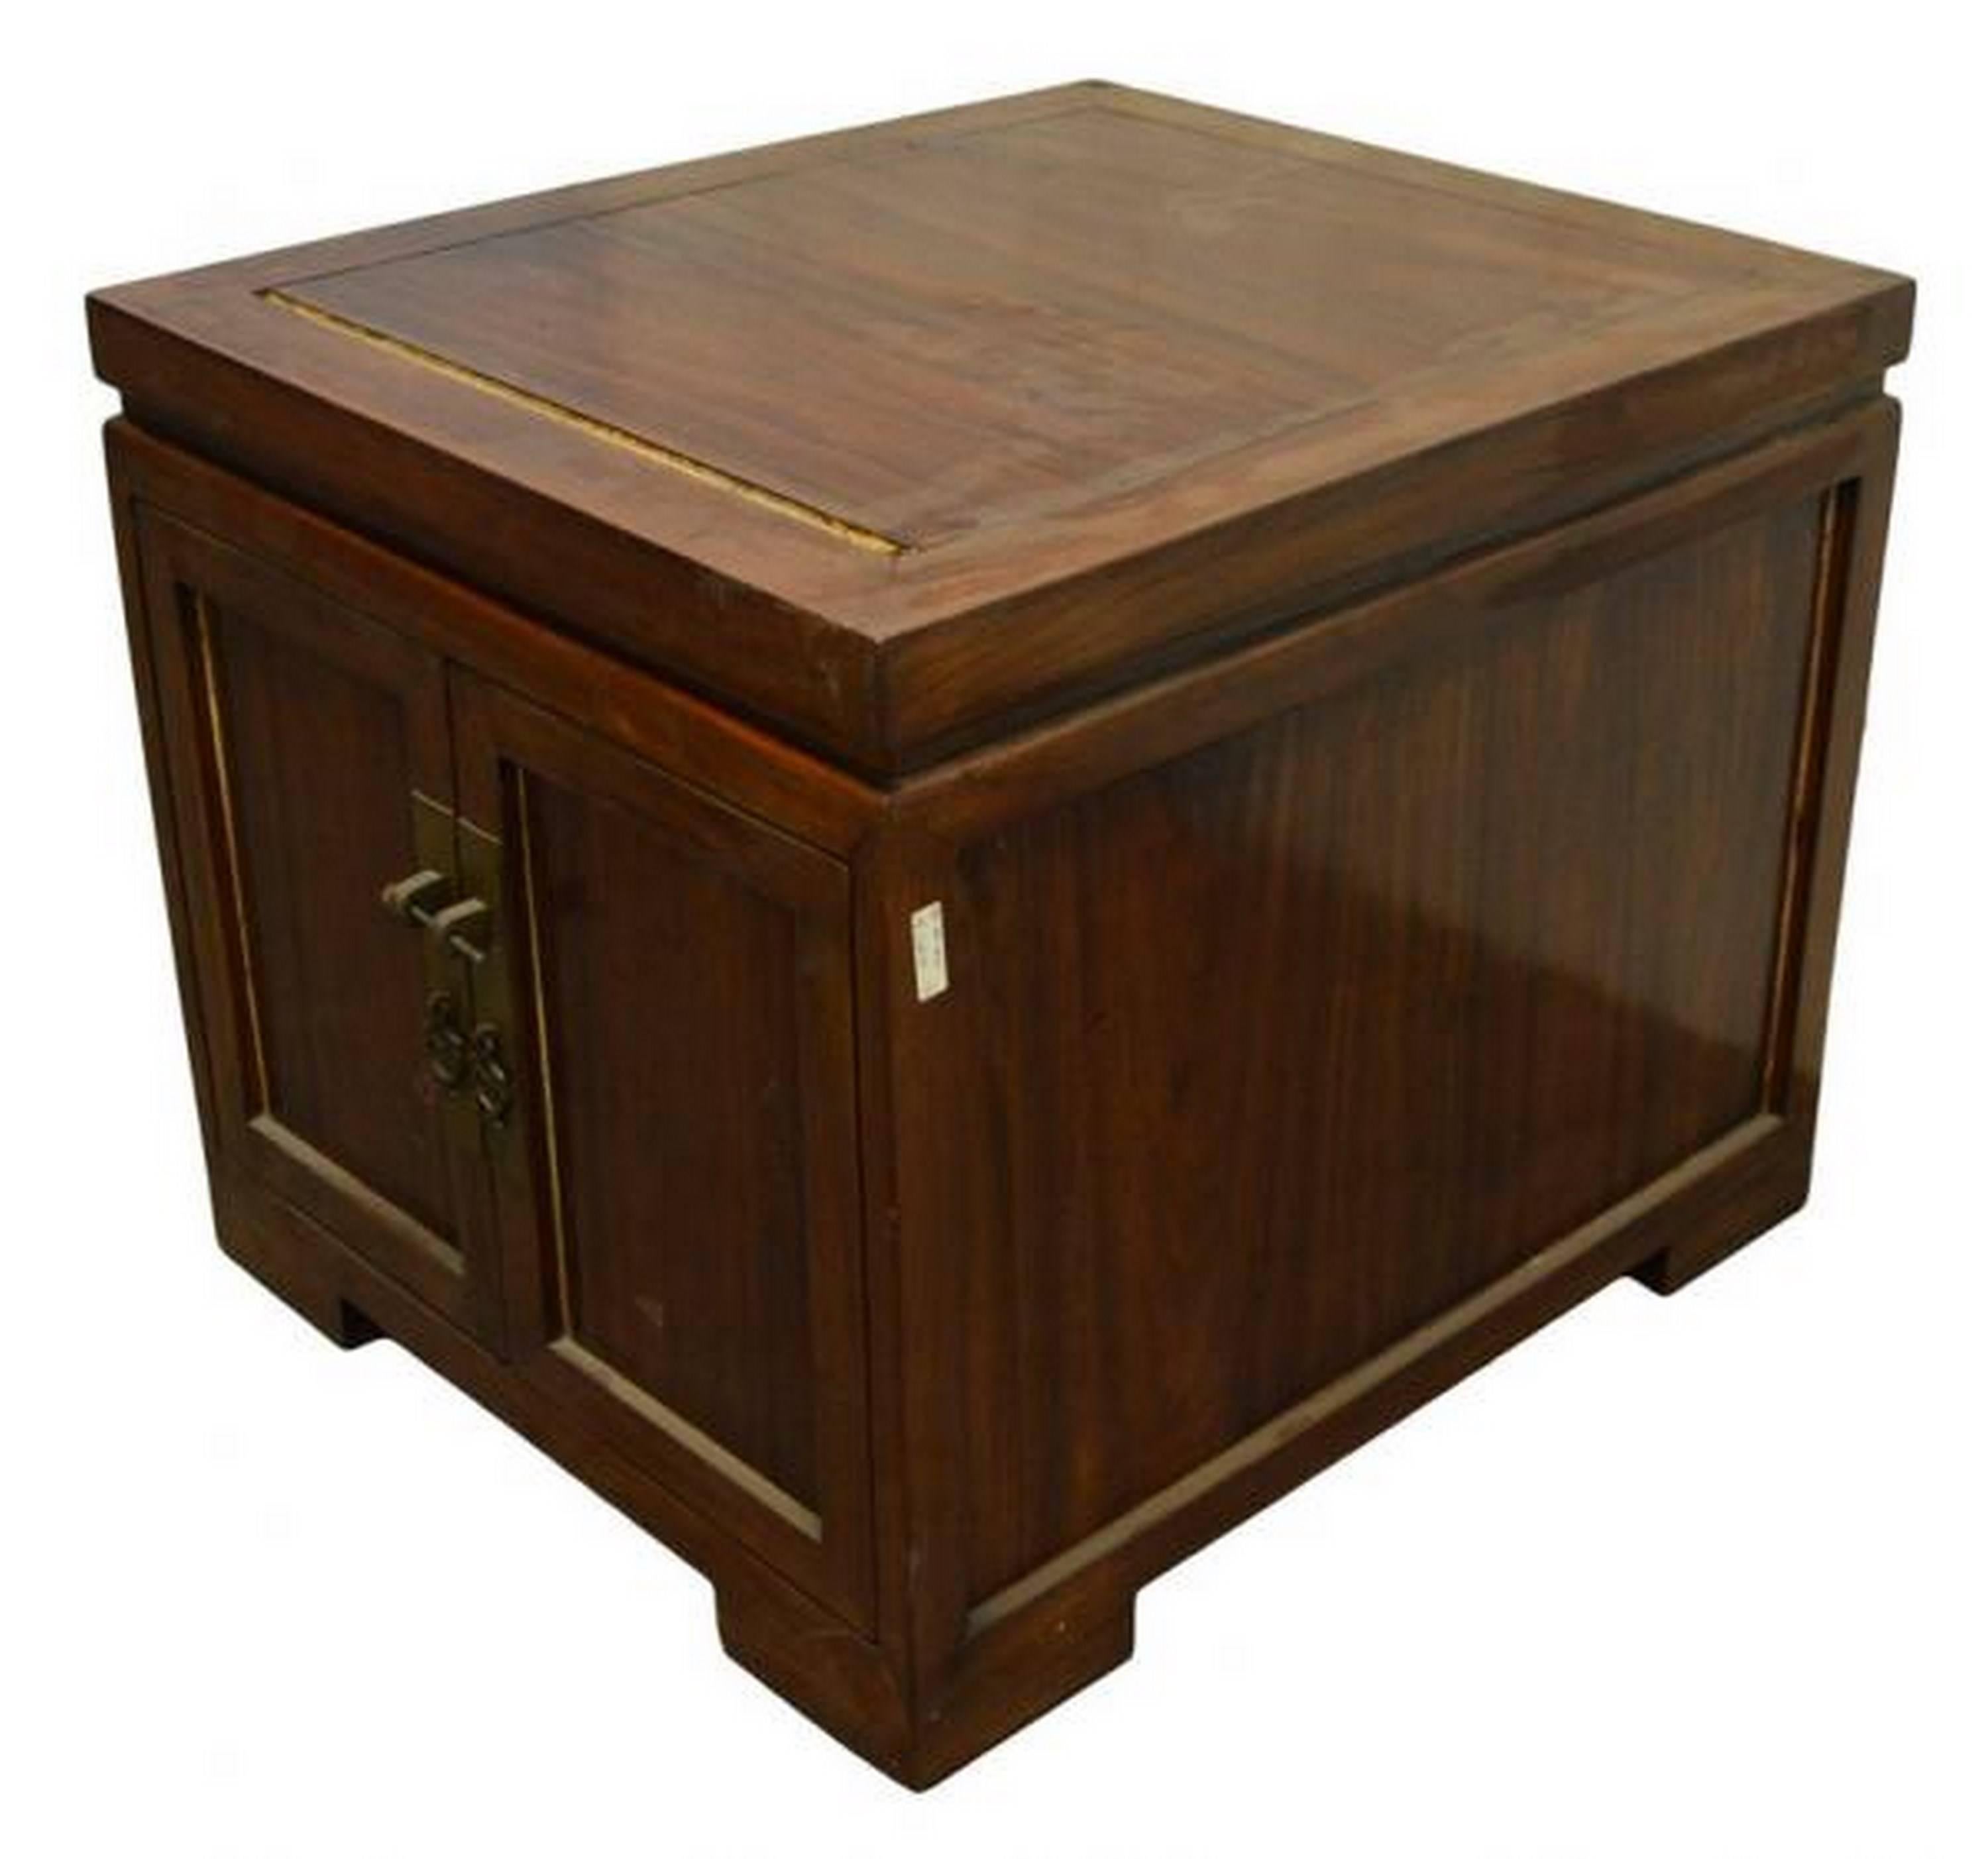 20th Century Antique Chinese Brown Lacquered Bedside Cabinet with Brass Hardware, circa 1900